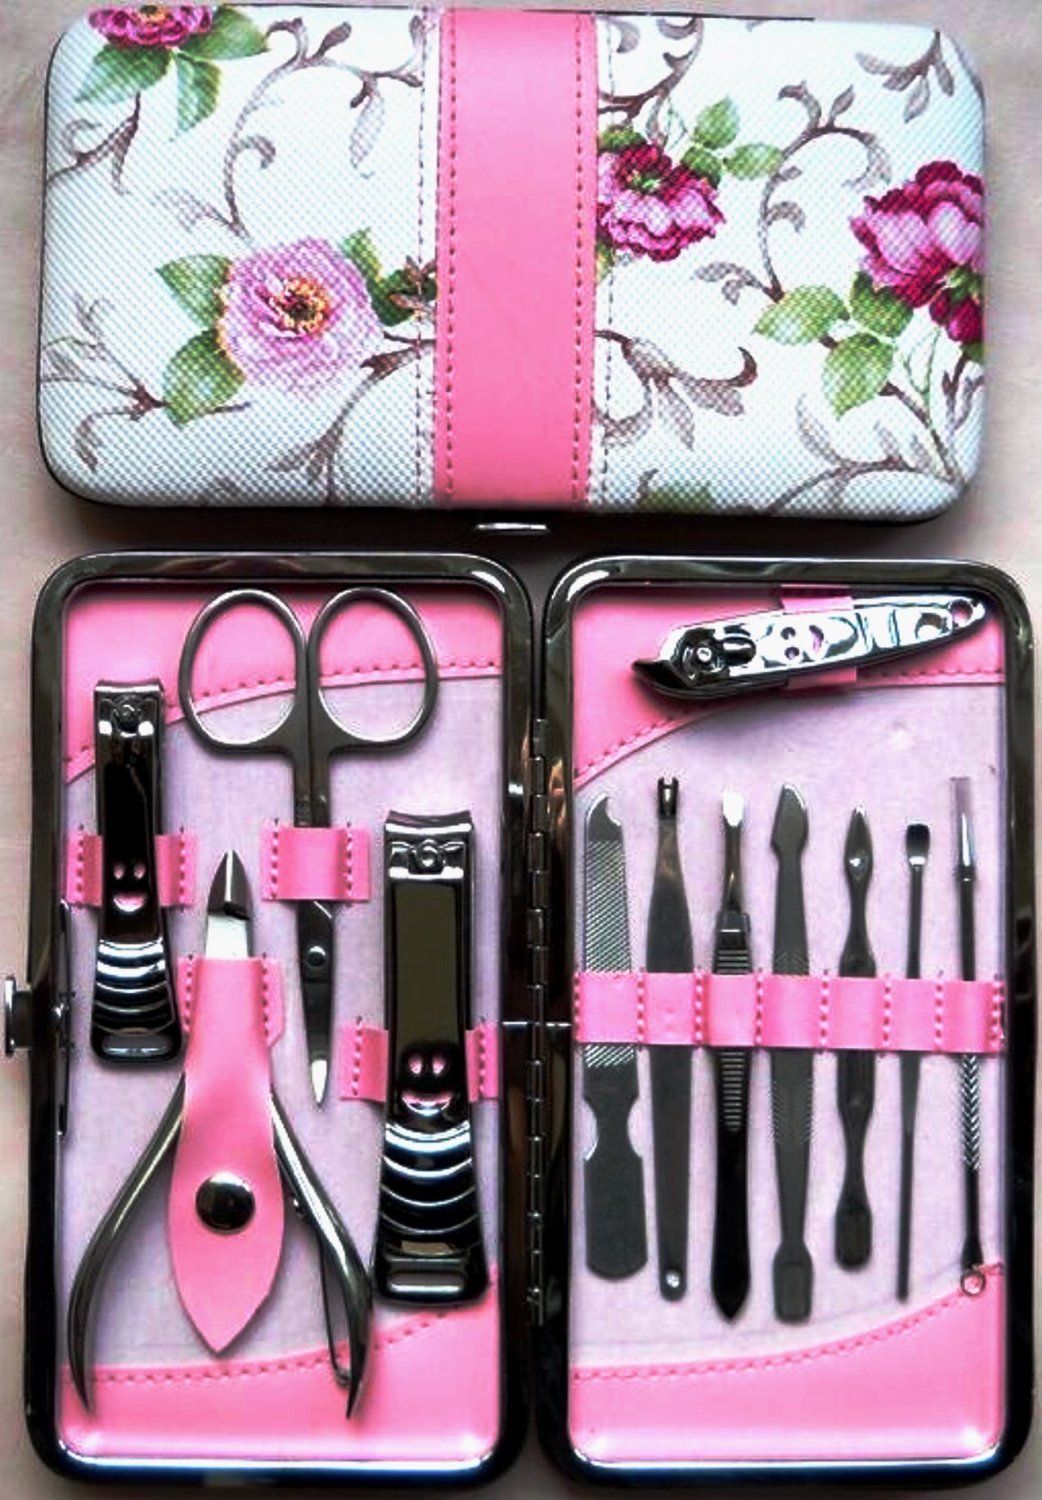 12 Tool Kits that are Guaranteed to Make Your Life Easier | www.onecrazyhouse.com